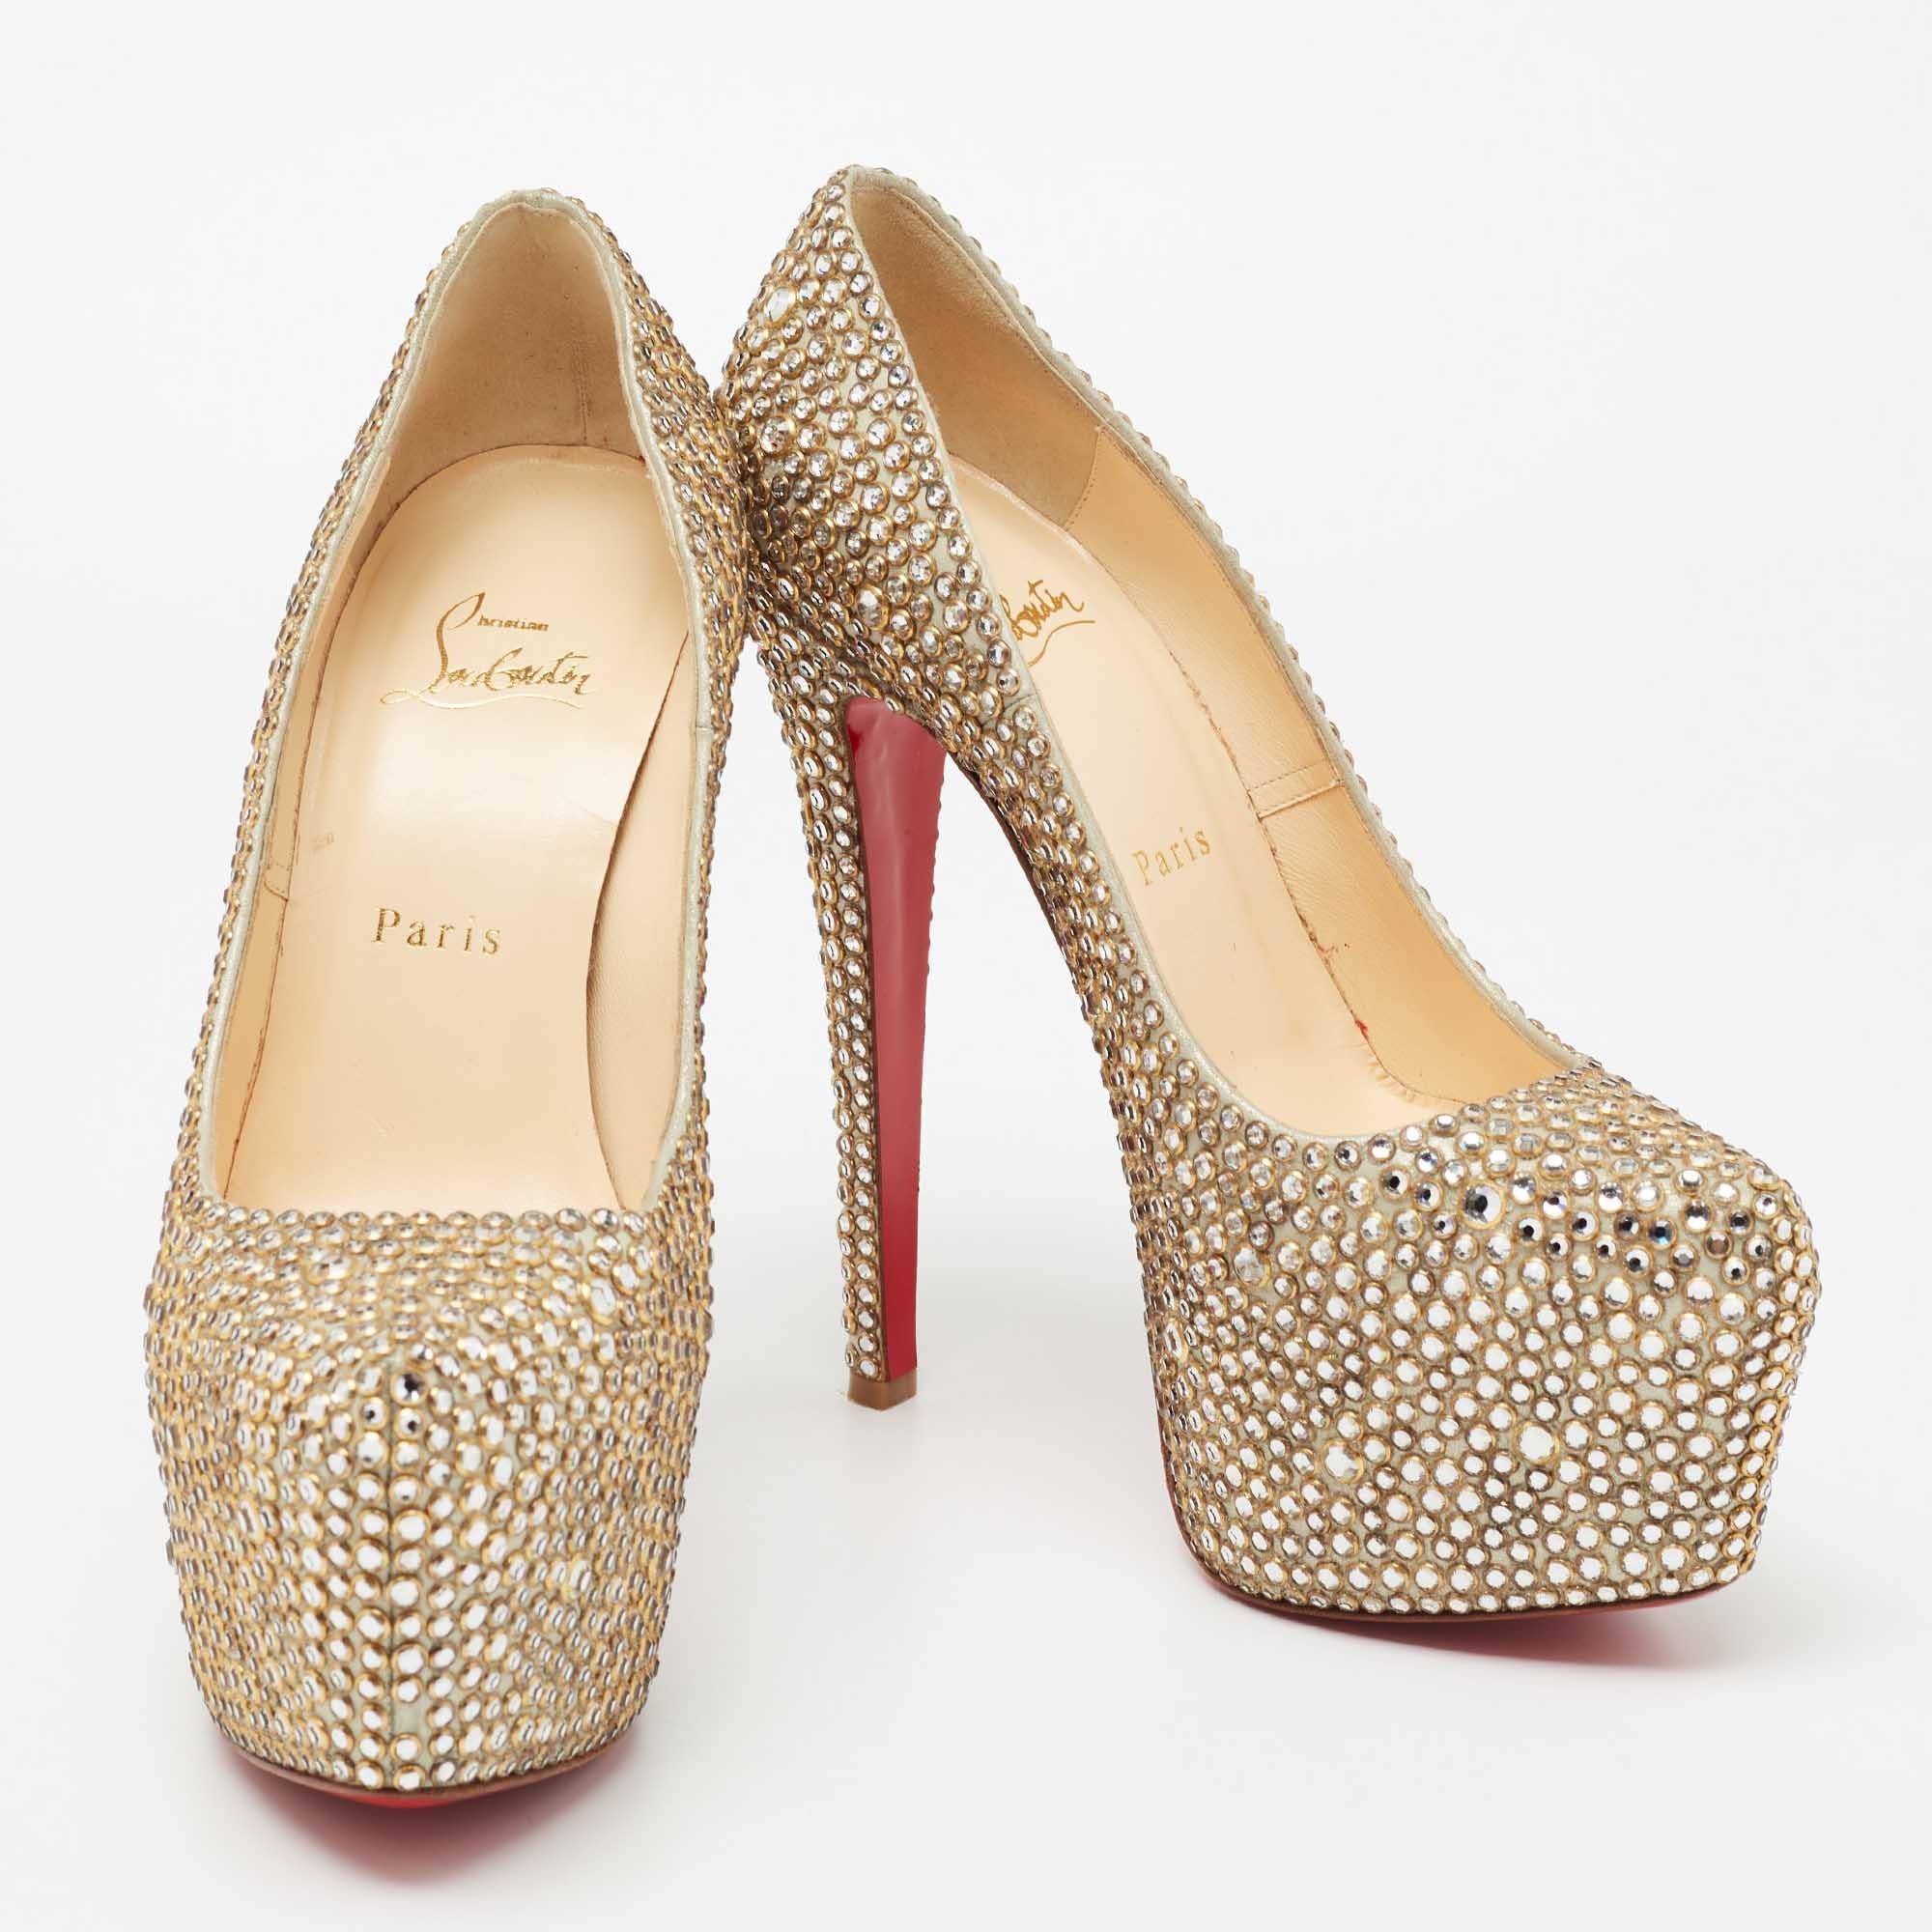 Beige Christian Louboutin Crystal Embellished Leather Daffodile Pumps Size 38.5 For Sale